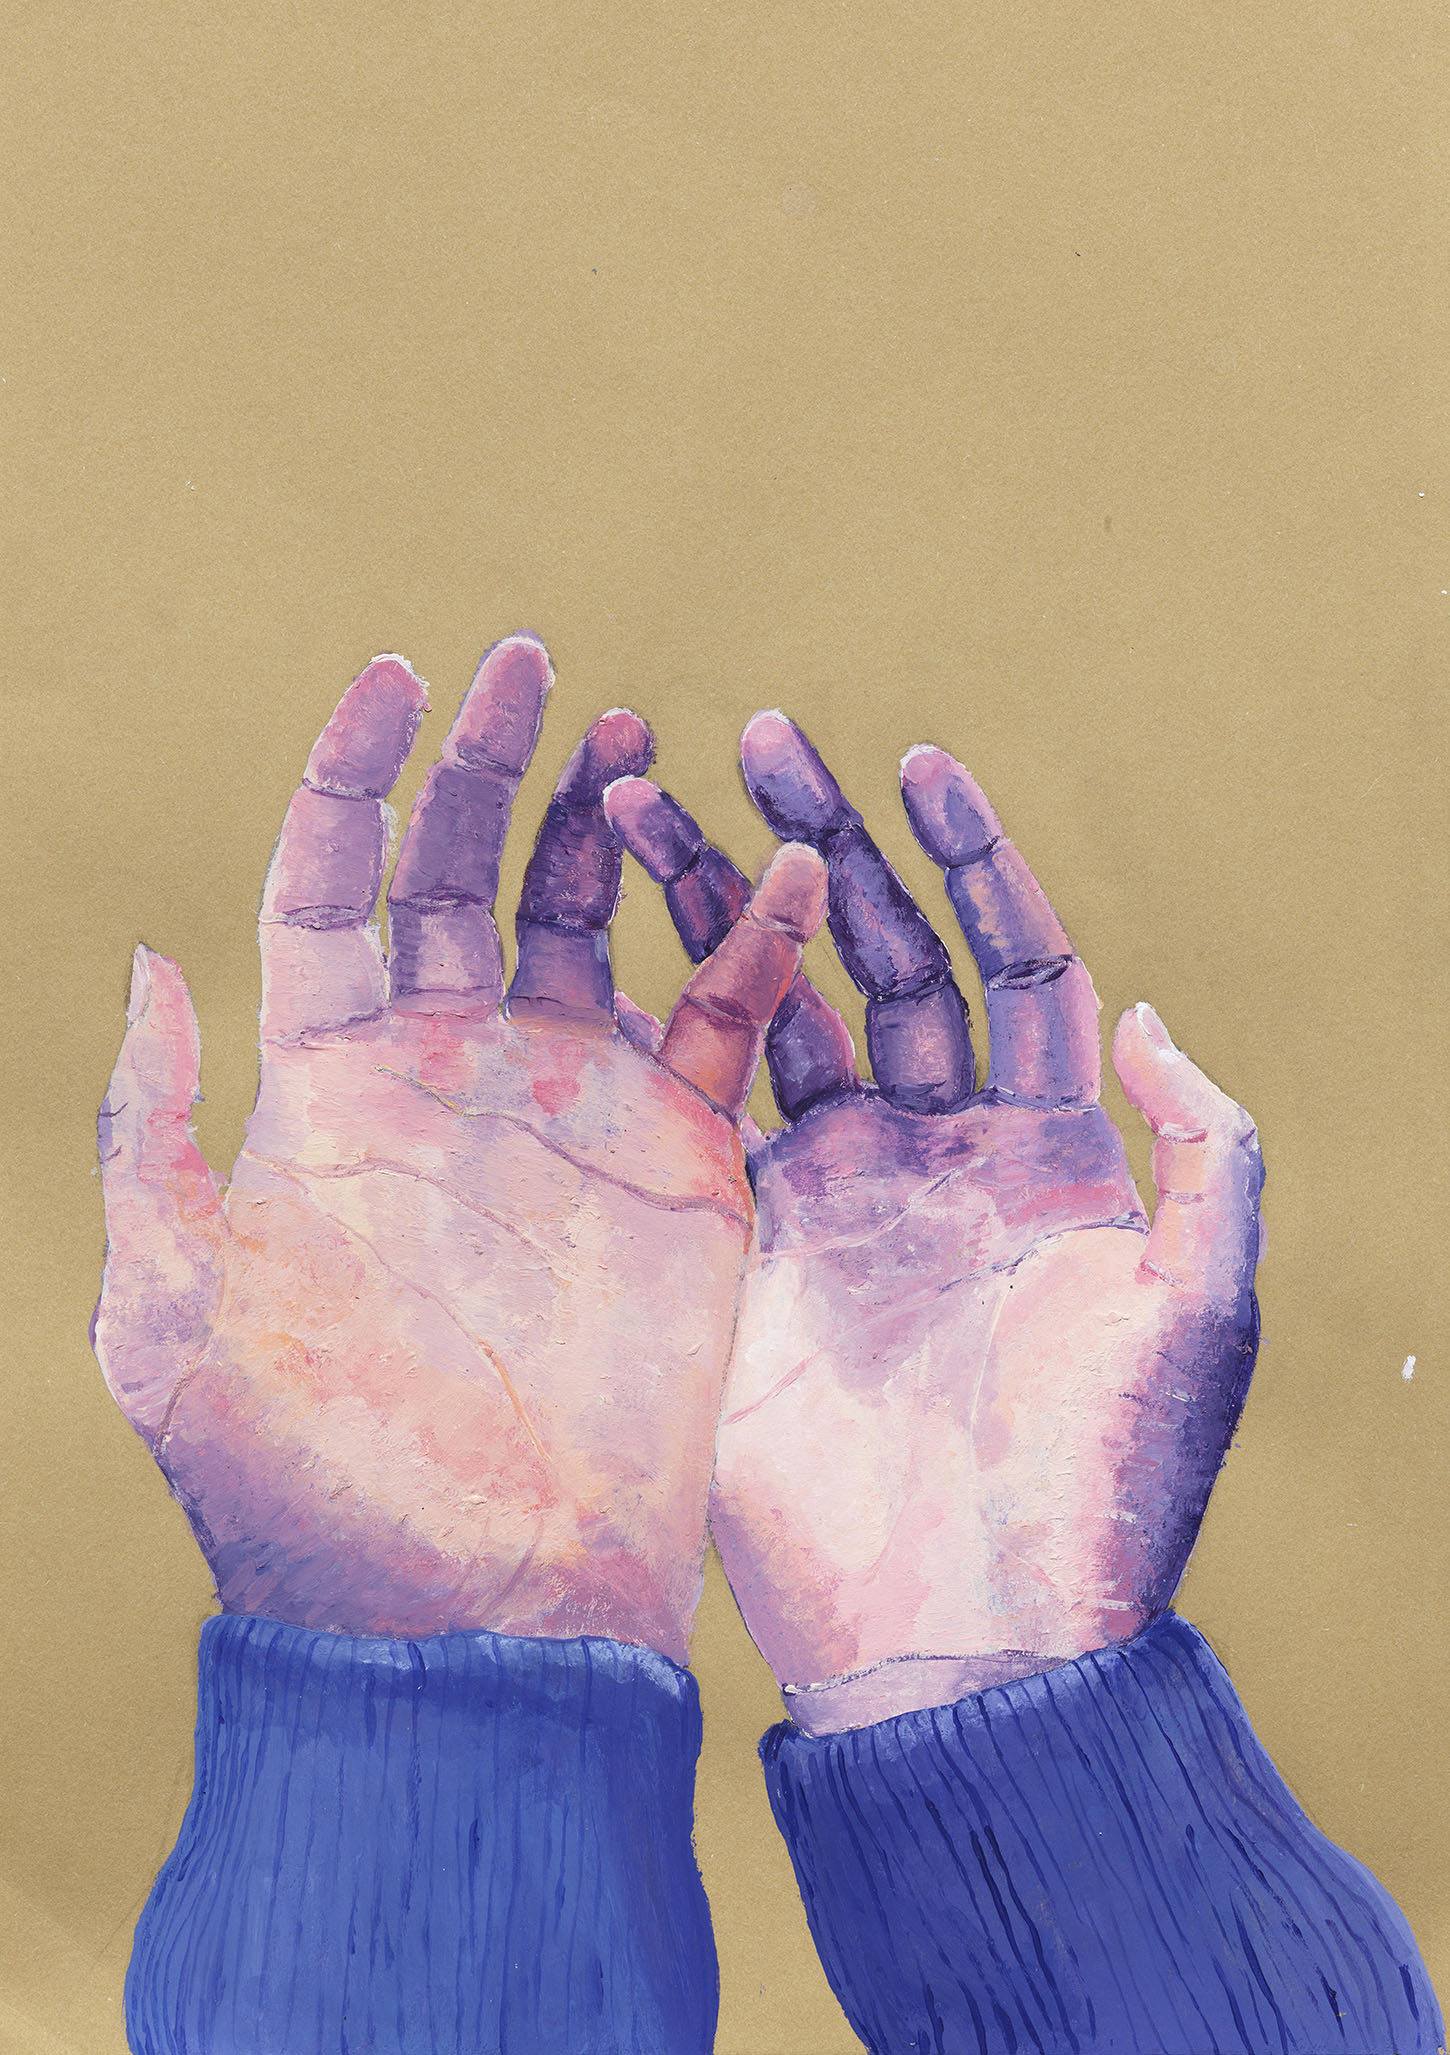 Painting in shades of pink, purple and blue of a pair of hands with palms facing upward